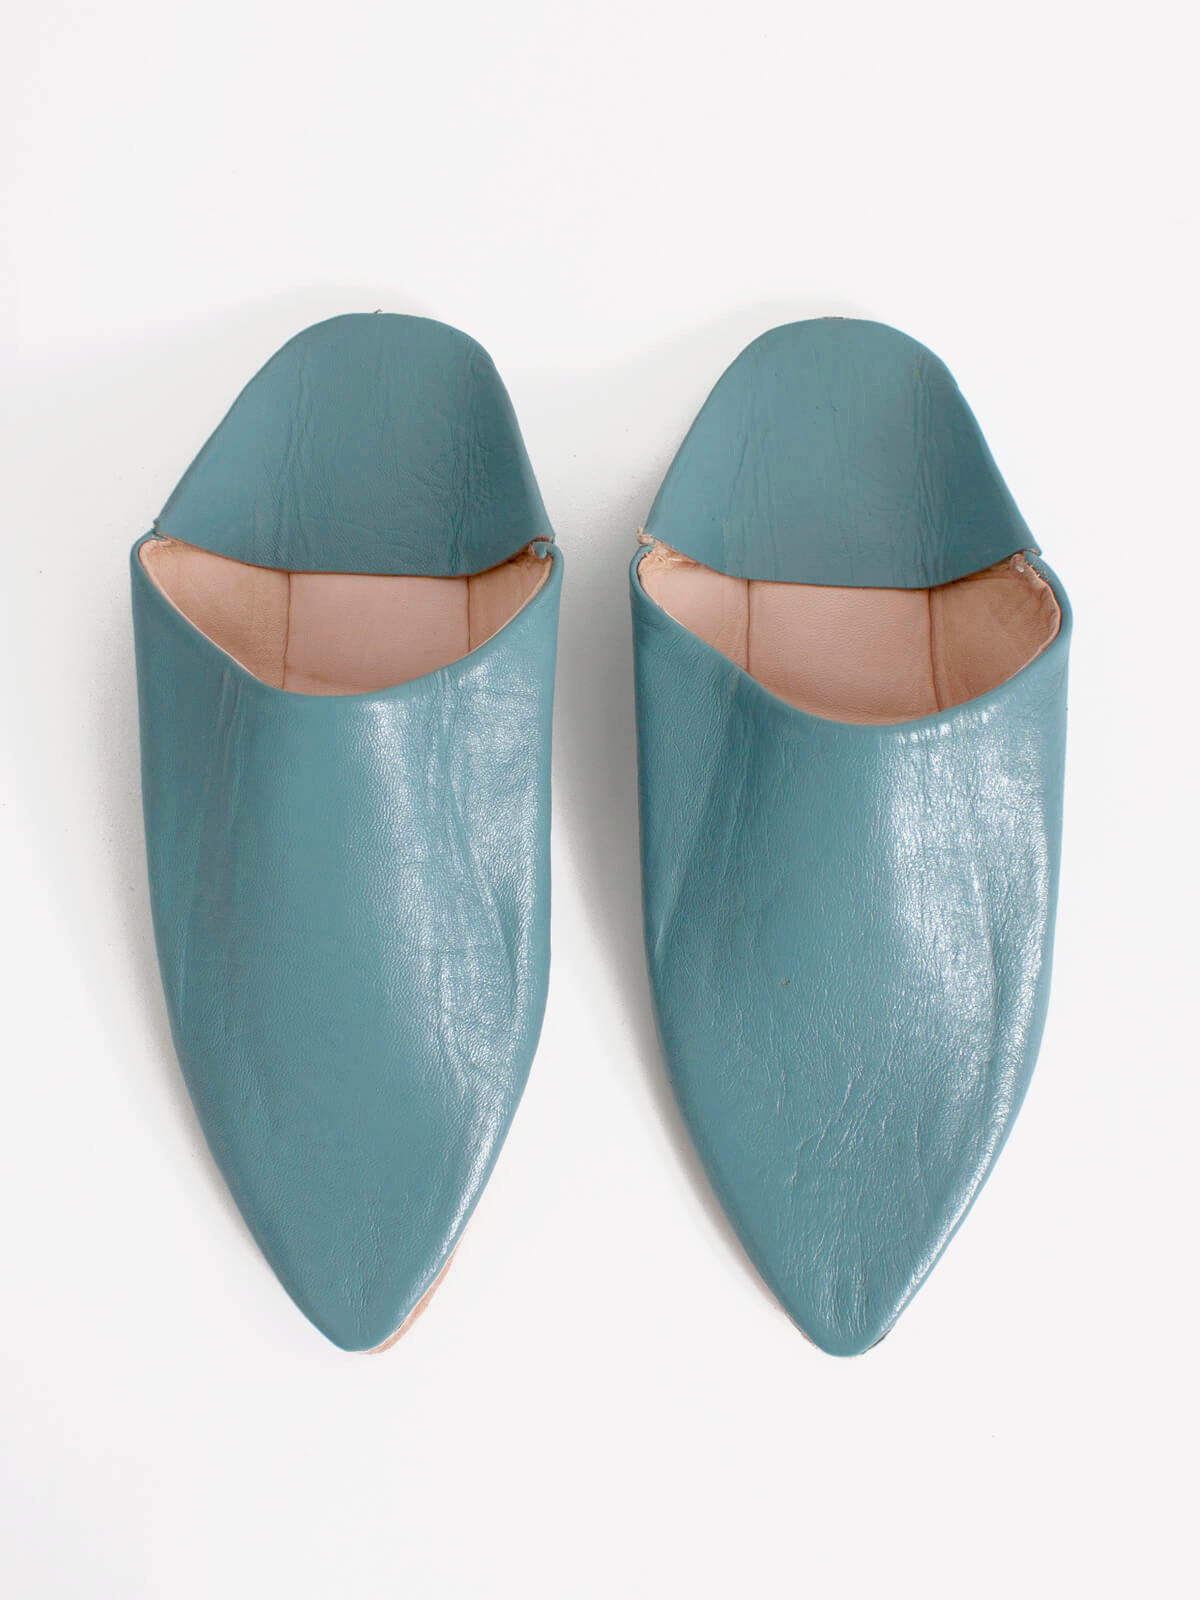 Moroccan Classic Pointed Babouche Slippers, Blue Grey